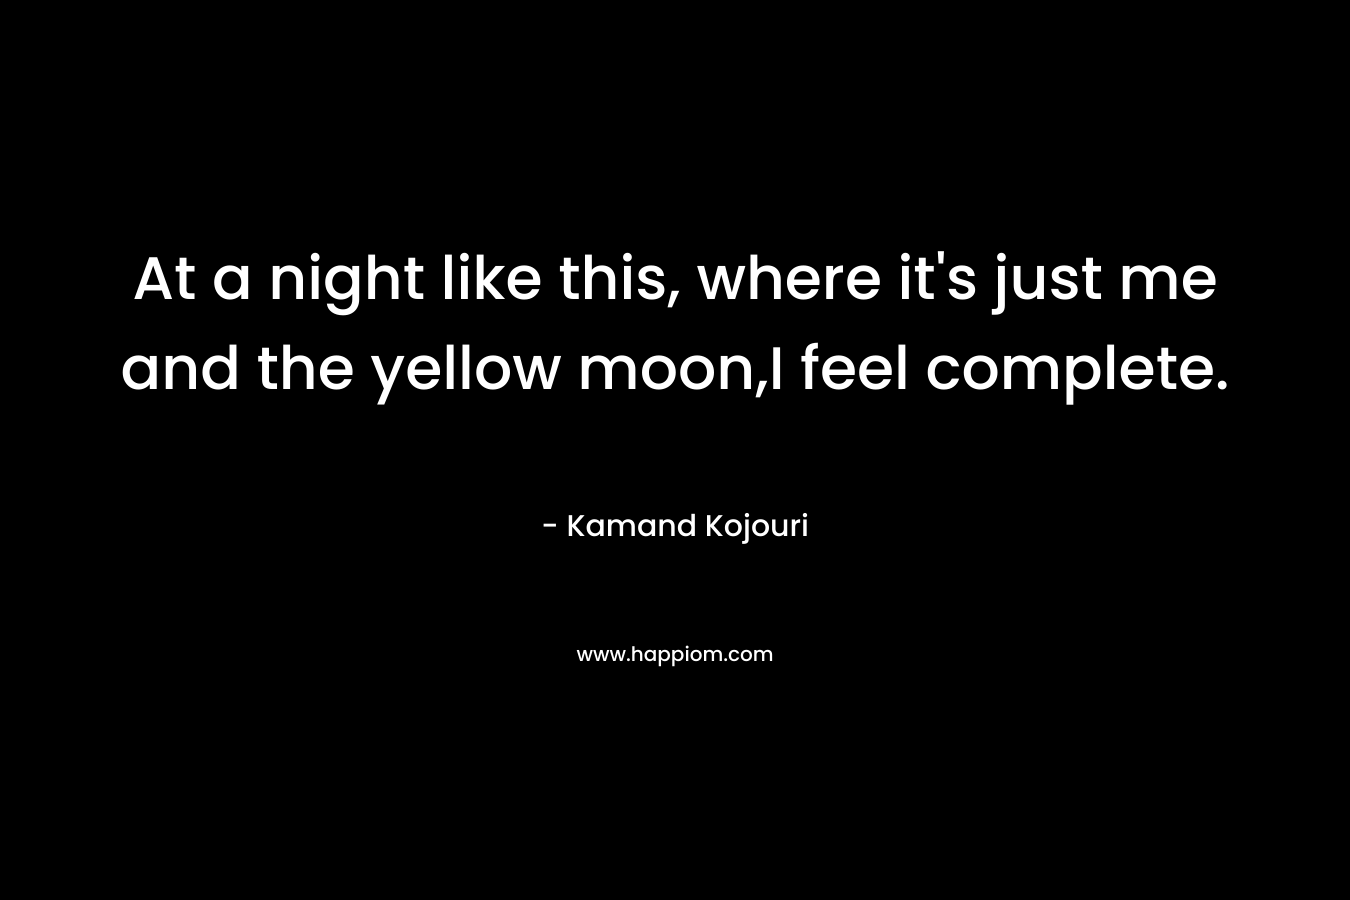 At a night like this, where it’s just me and the yellow moon,I feel complete. – Kamand Kojouri